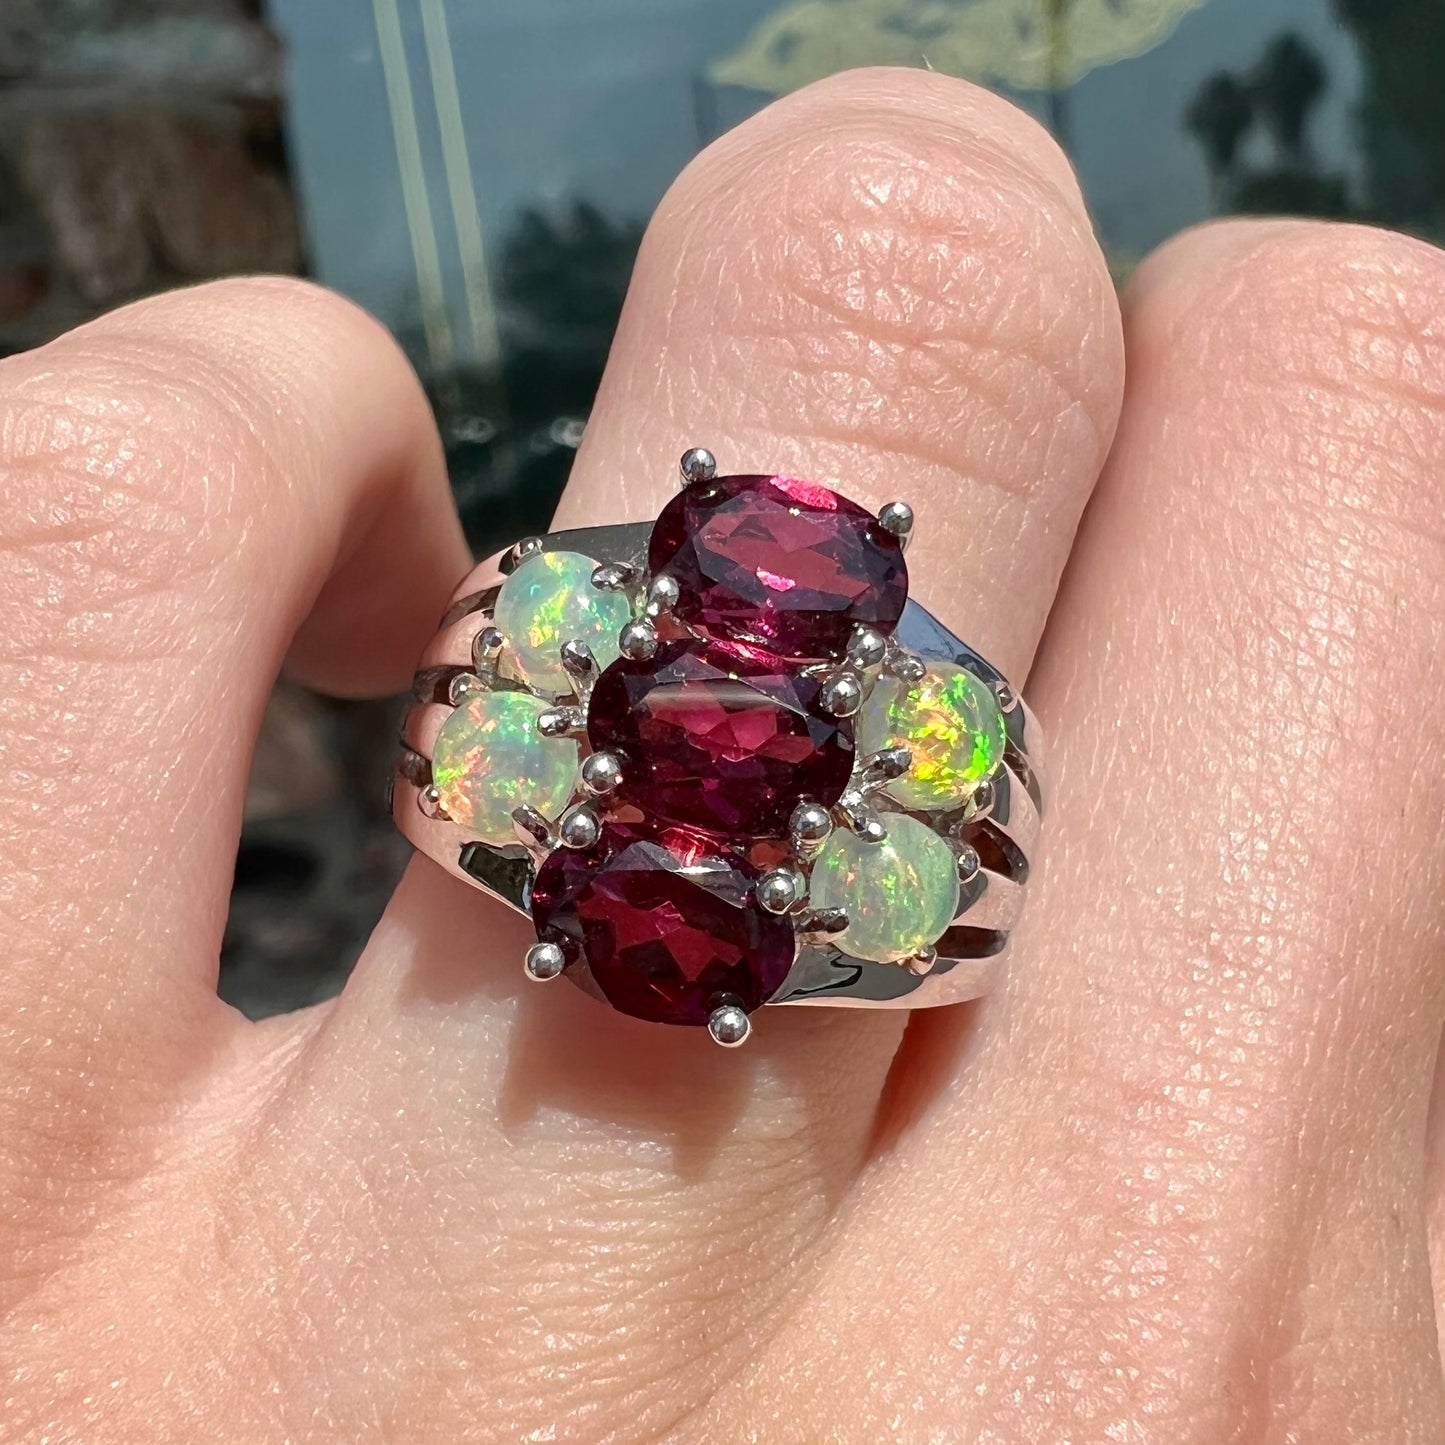 A sterling silver ring set with three oval cut rhodolite garnets and four round cabochon cut Ethiopian opals.